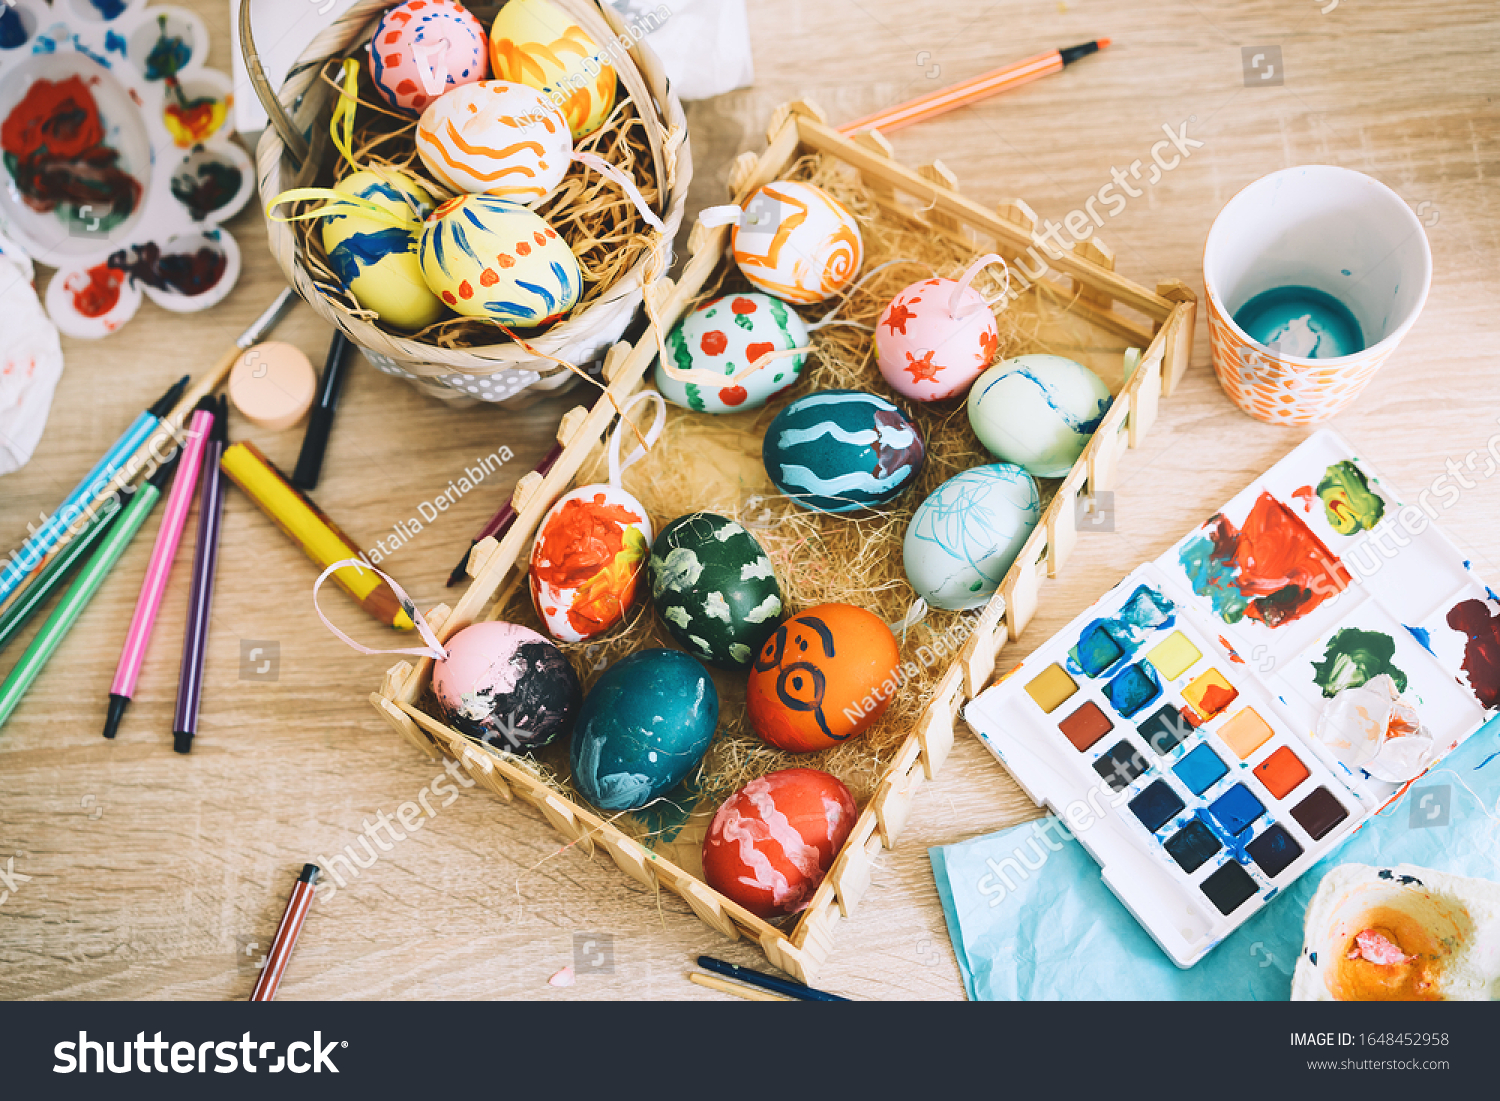 Happy Easter! Painting eggs. Paints, felt-tip pens, decorations for coloring eggs for holiday. Creative background. Family with kids preparing for Easter. #1648452958